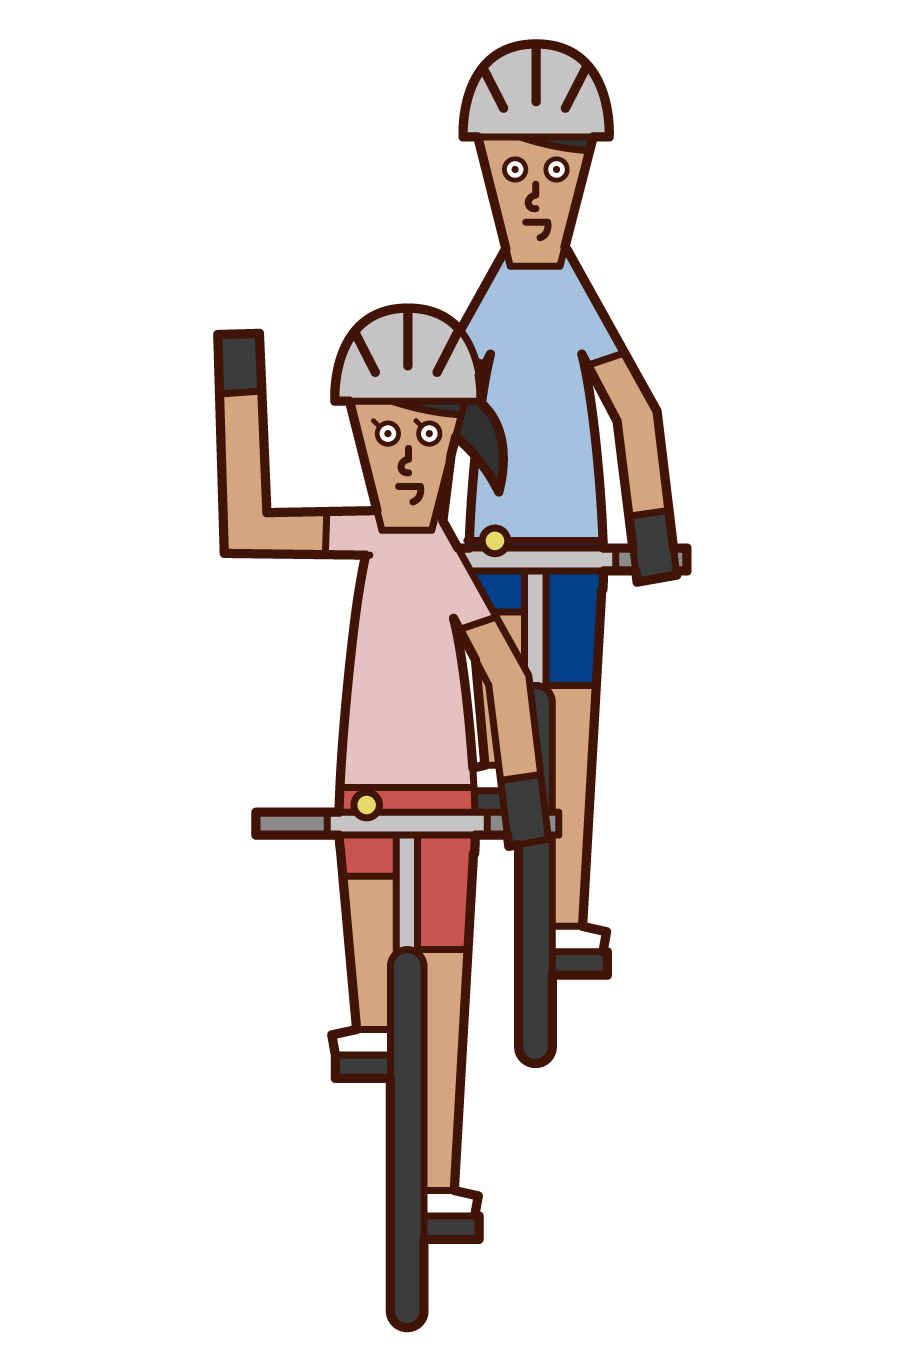 Illustration of bicycle hand signal, left turn (male)